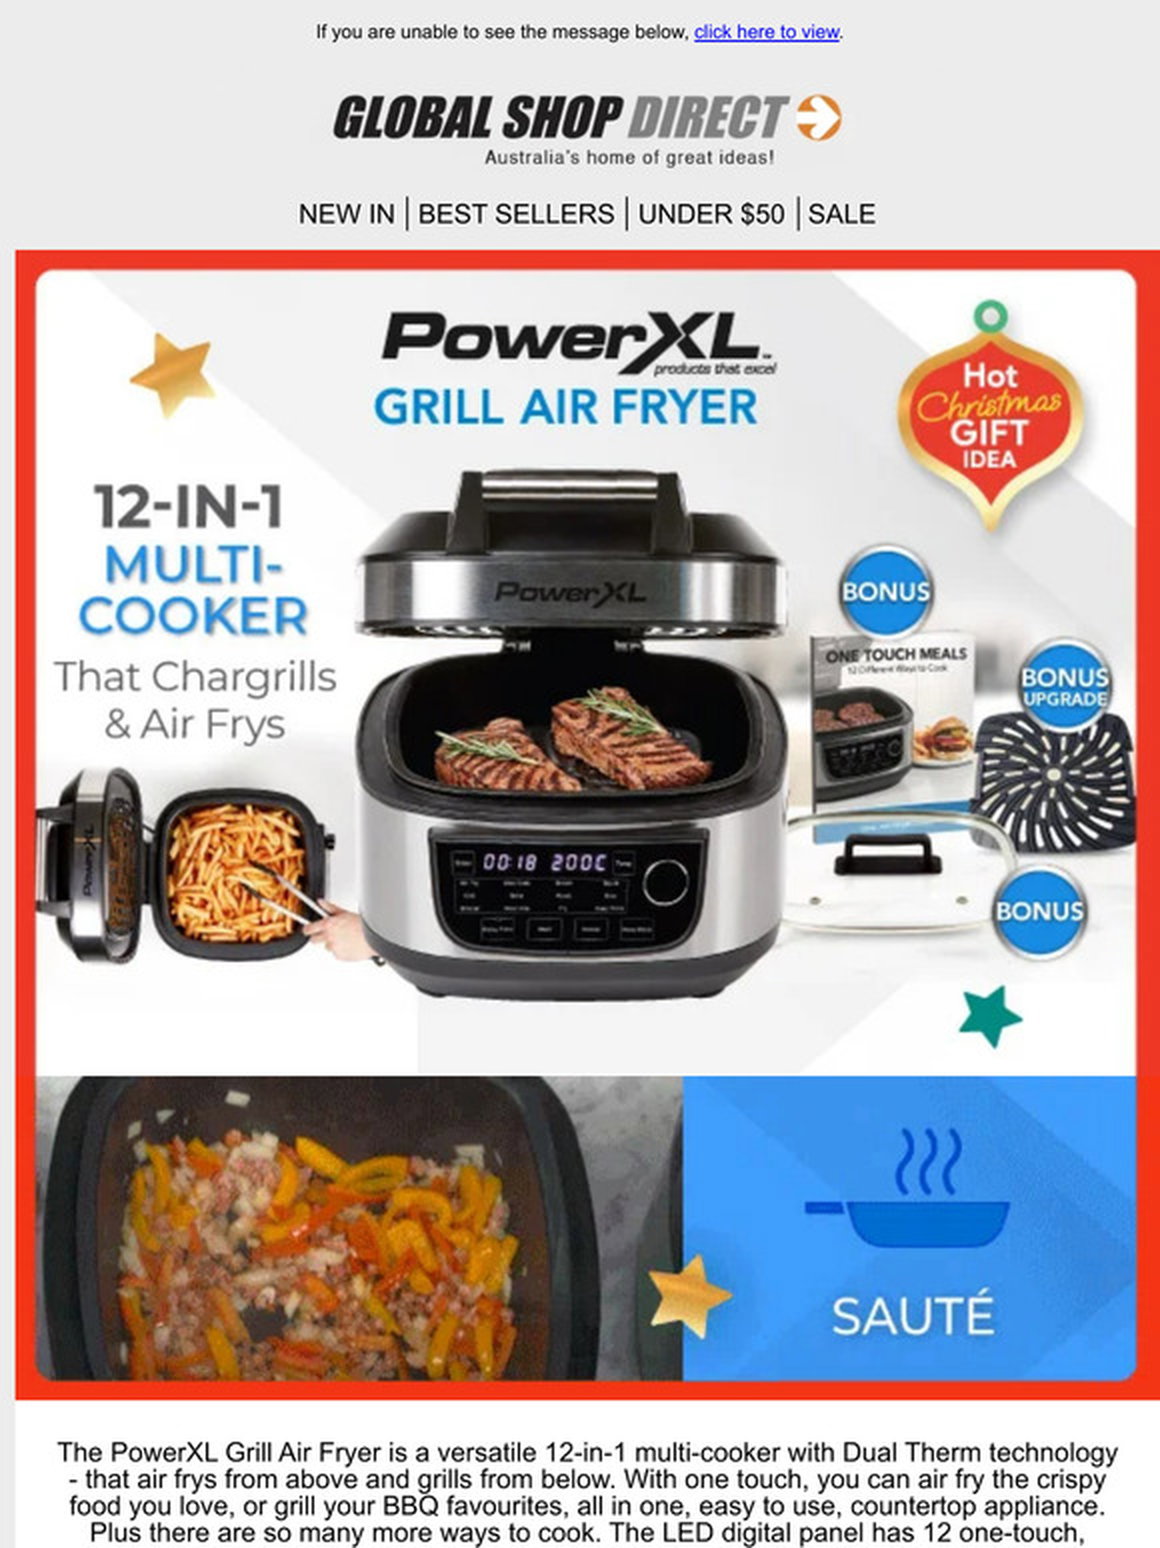 PowerXL Grill Air Fryer Oven: 12-in-1 Multi Cooker